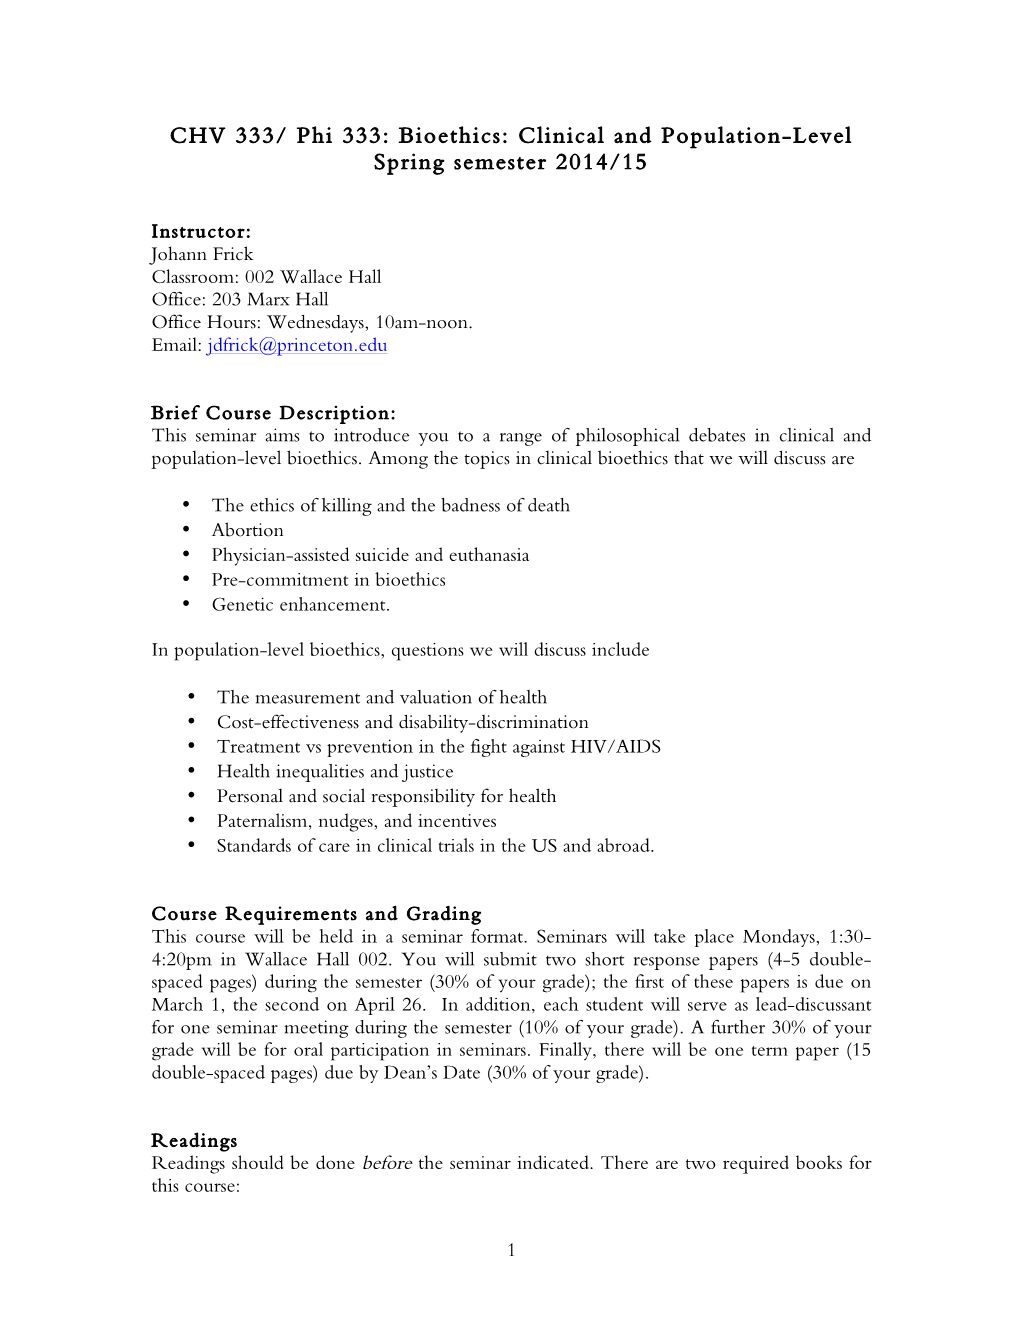 Phi 333: Bioethics: Clinical and Population-Level Spring Semester 2014/15